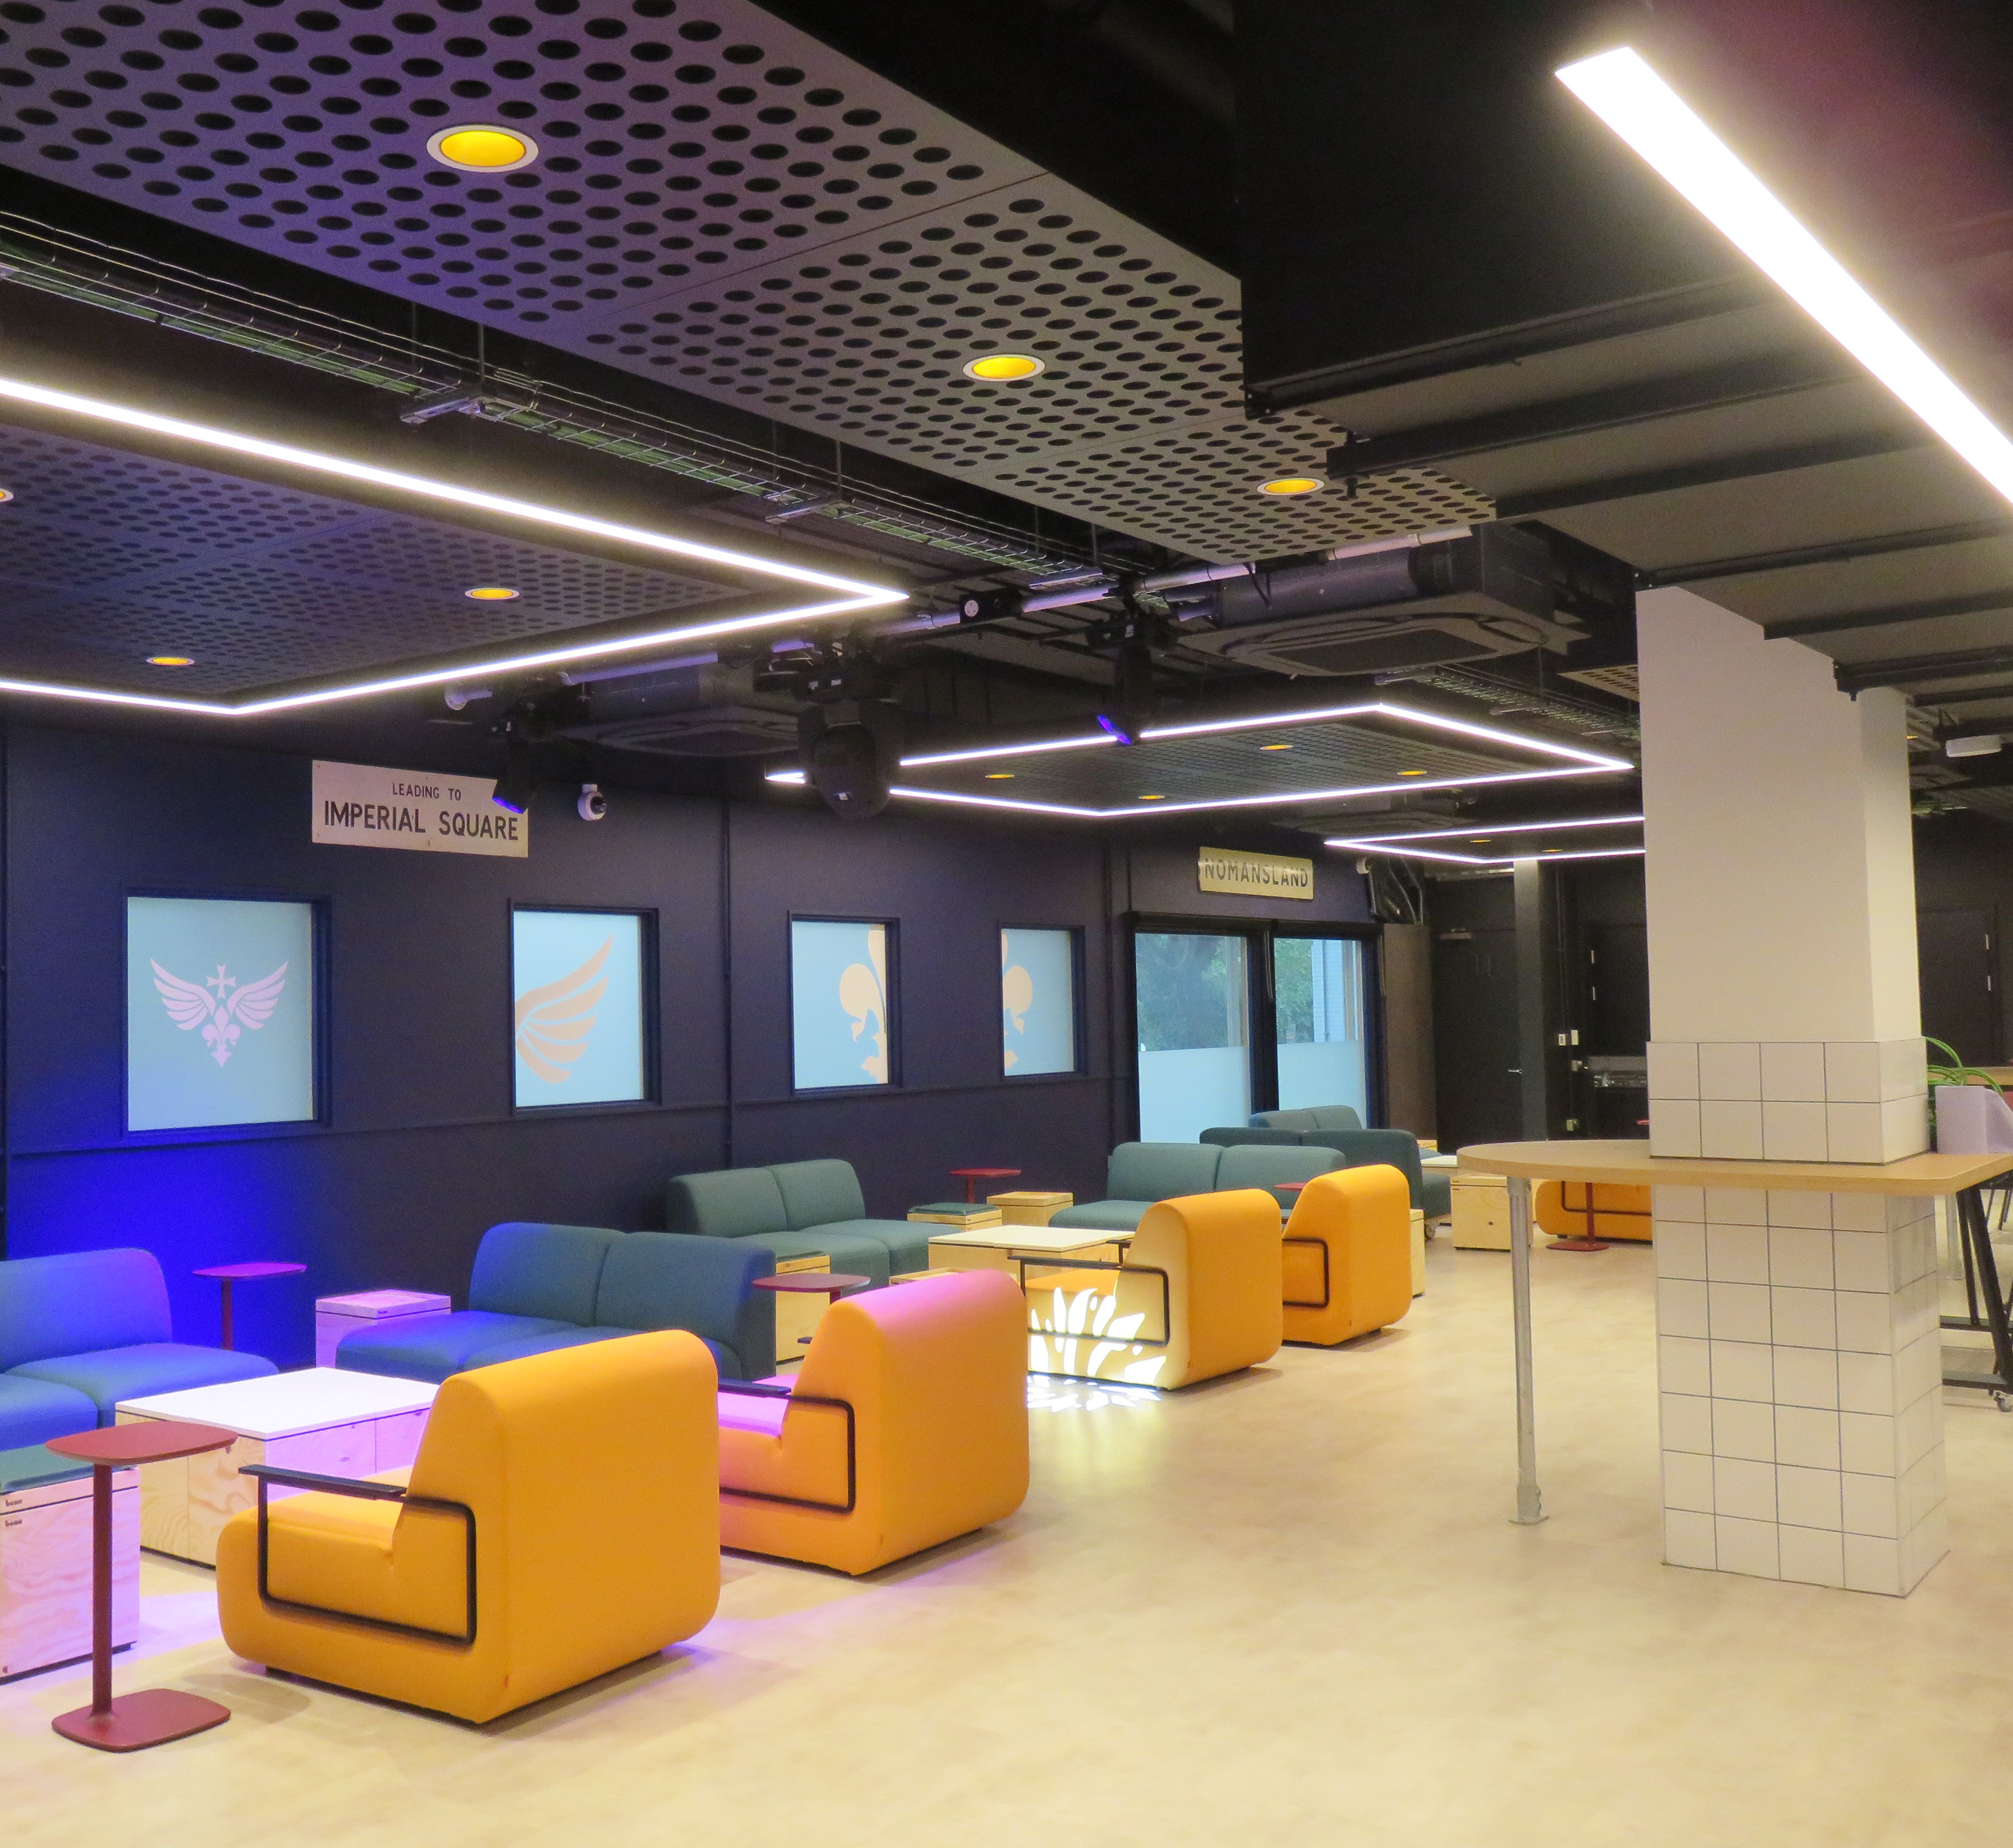 The colourful relaxed seating, clar floor and colourful lighting in the 'party' area of the bar